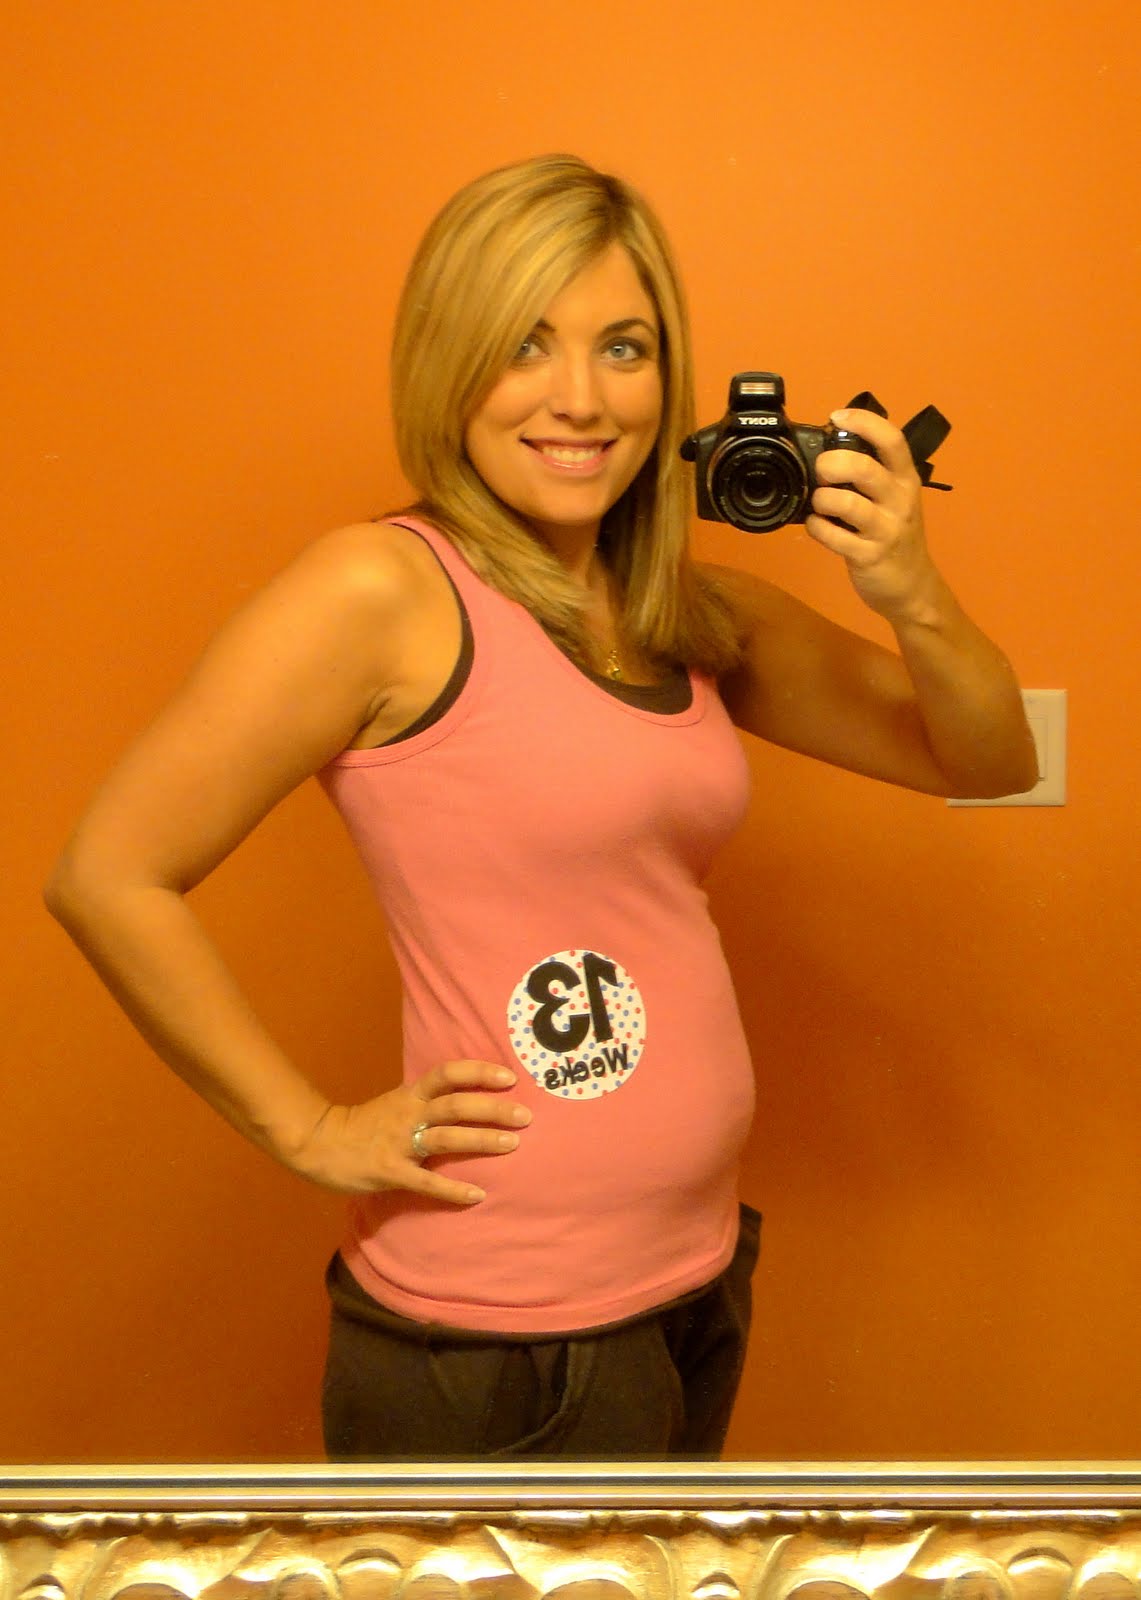 the-journey-of-parenthood-13-weeks-pregnant